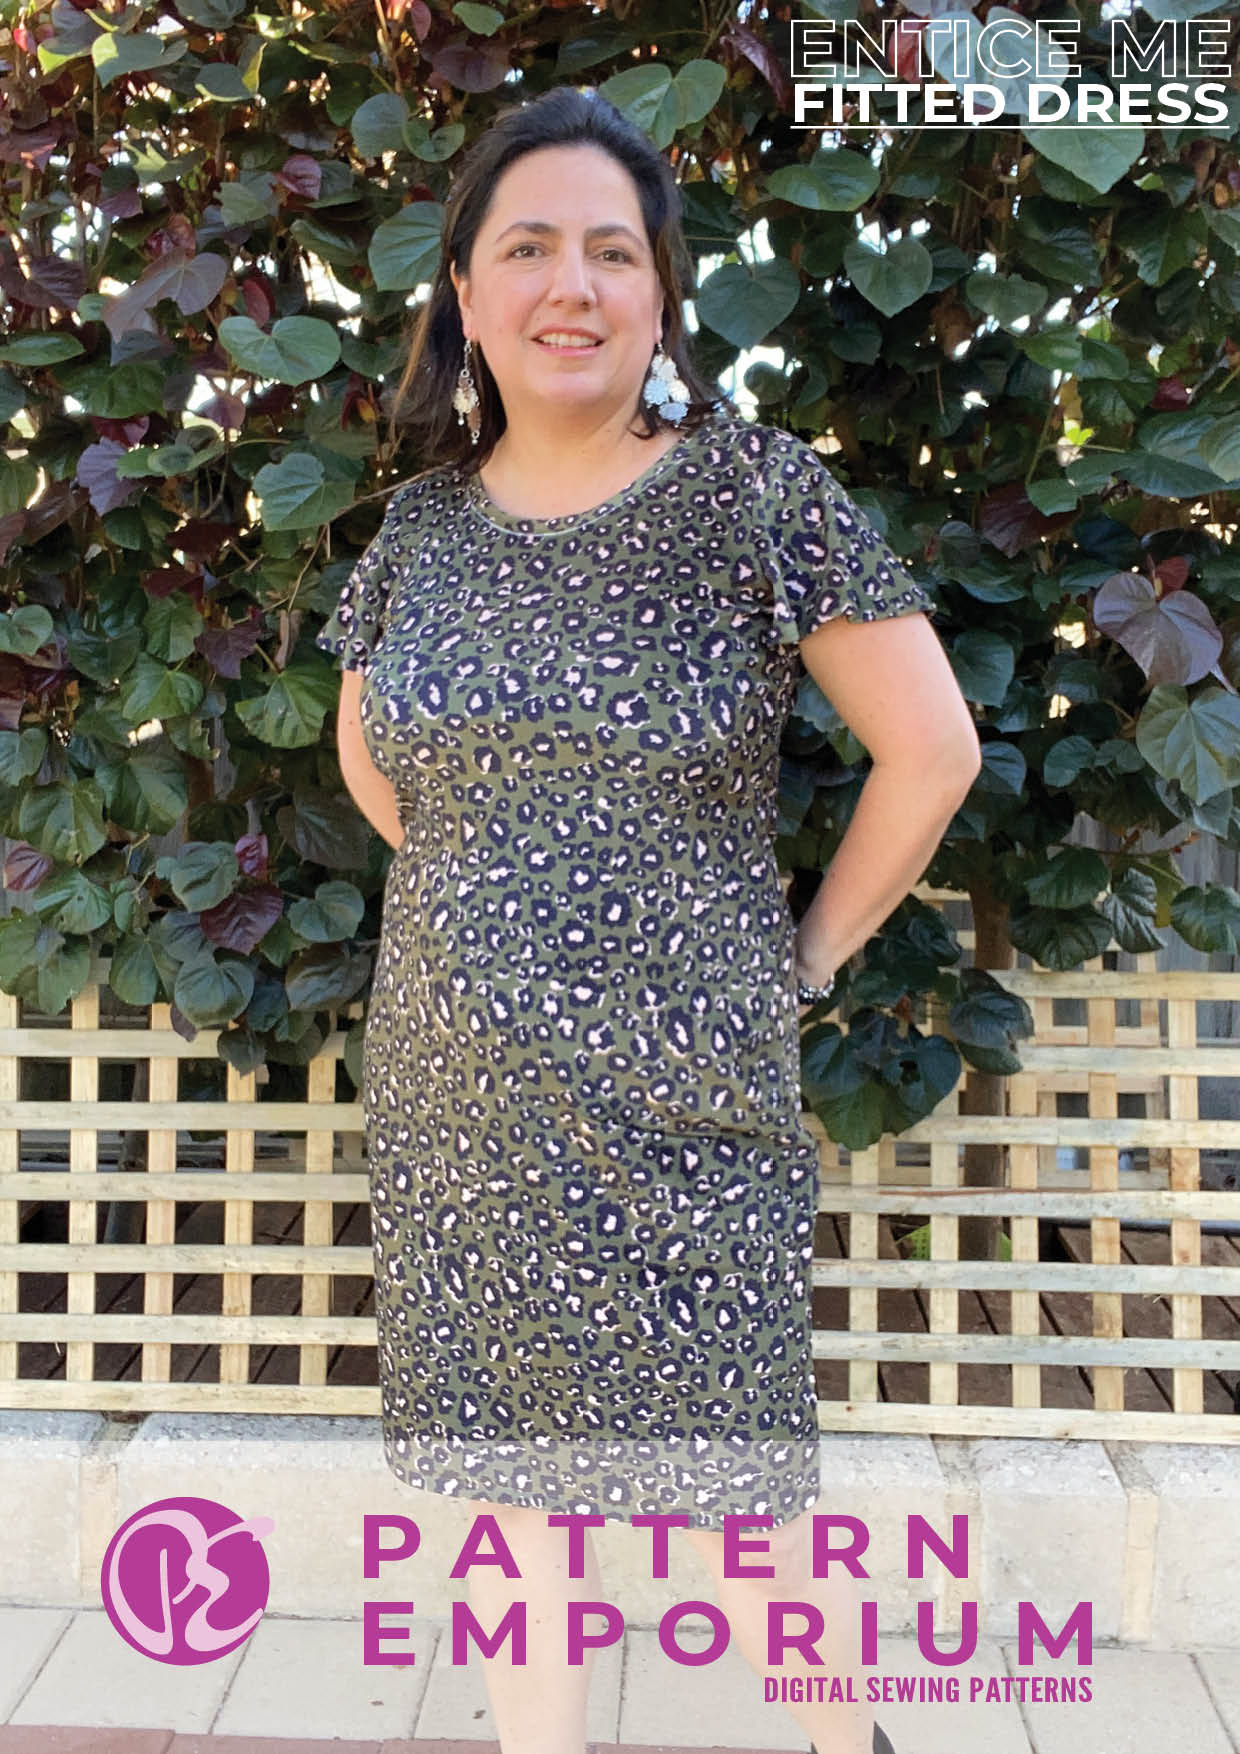 Entice Me | Fitted Dress Sewing Pattern